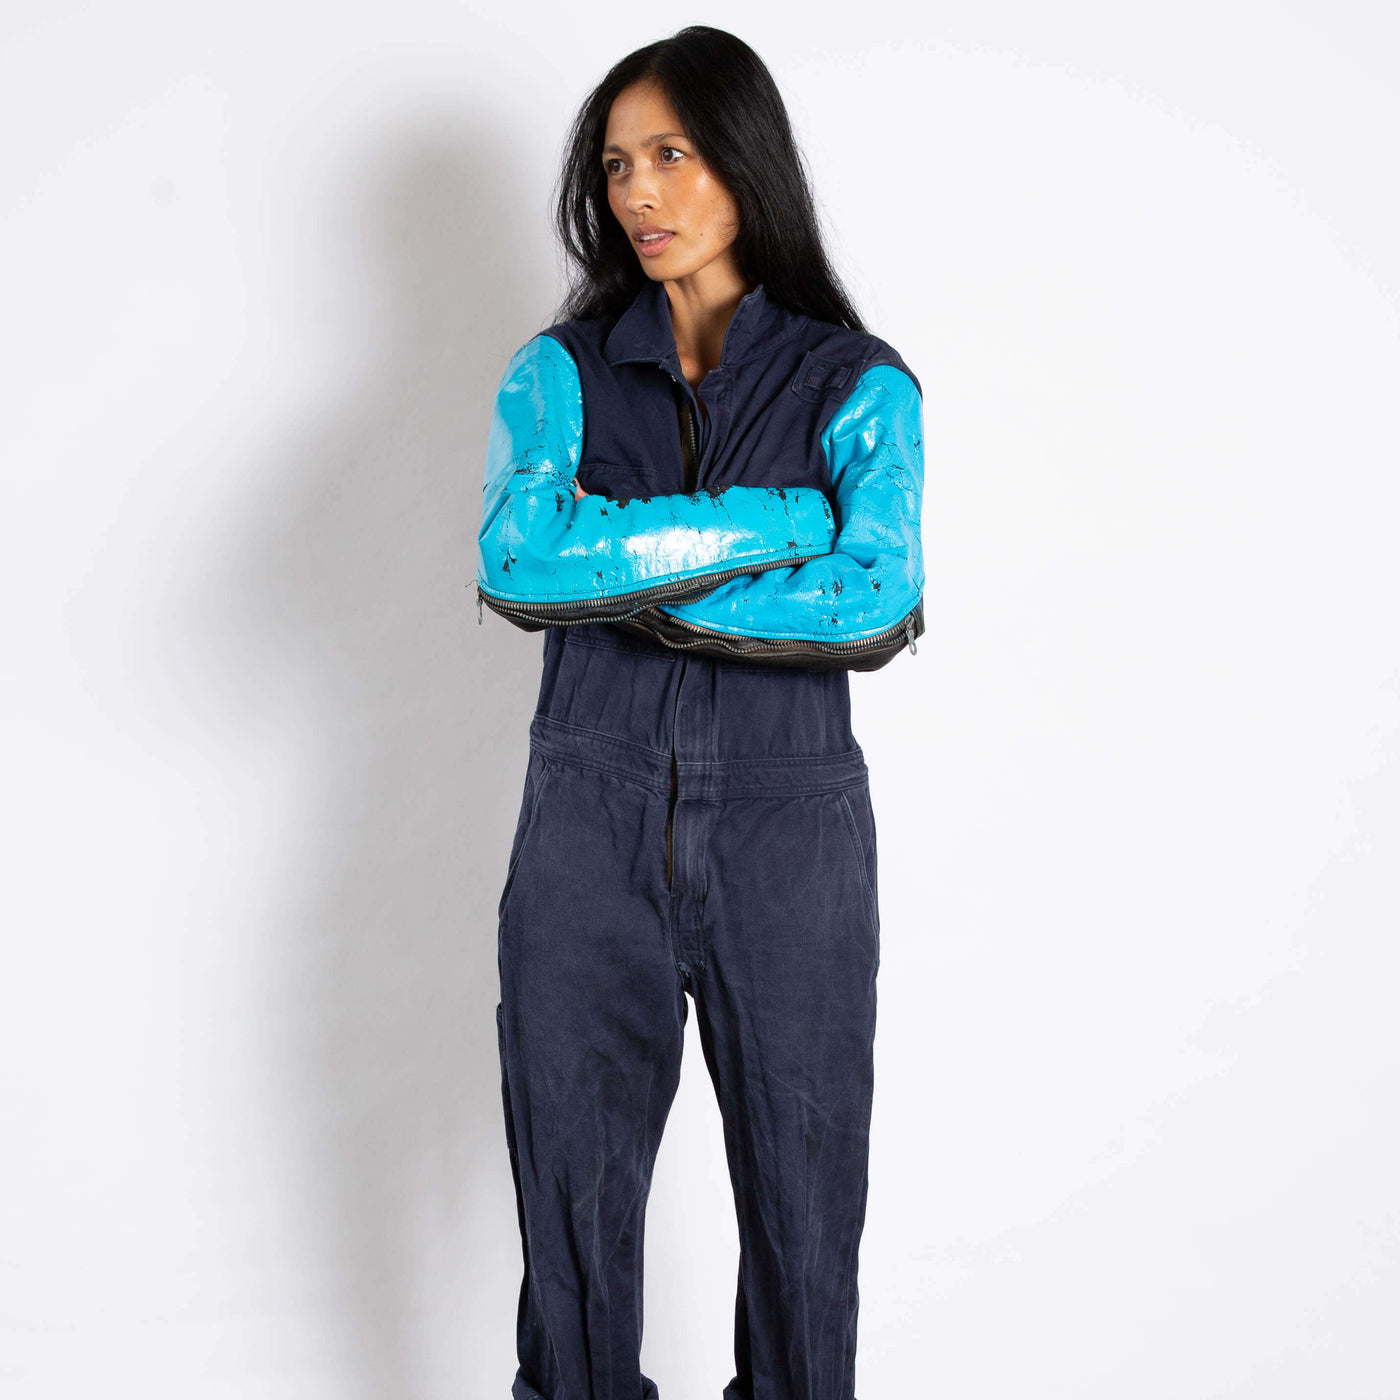 Model wears a jumpsuit that is dark navy blue and zipper up the front.  the sleeves are made of a different leather materials that is bright blue.  The paint is cracked showing black showing through.  zippers on sleeves zip up to the elbows.